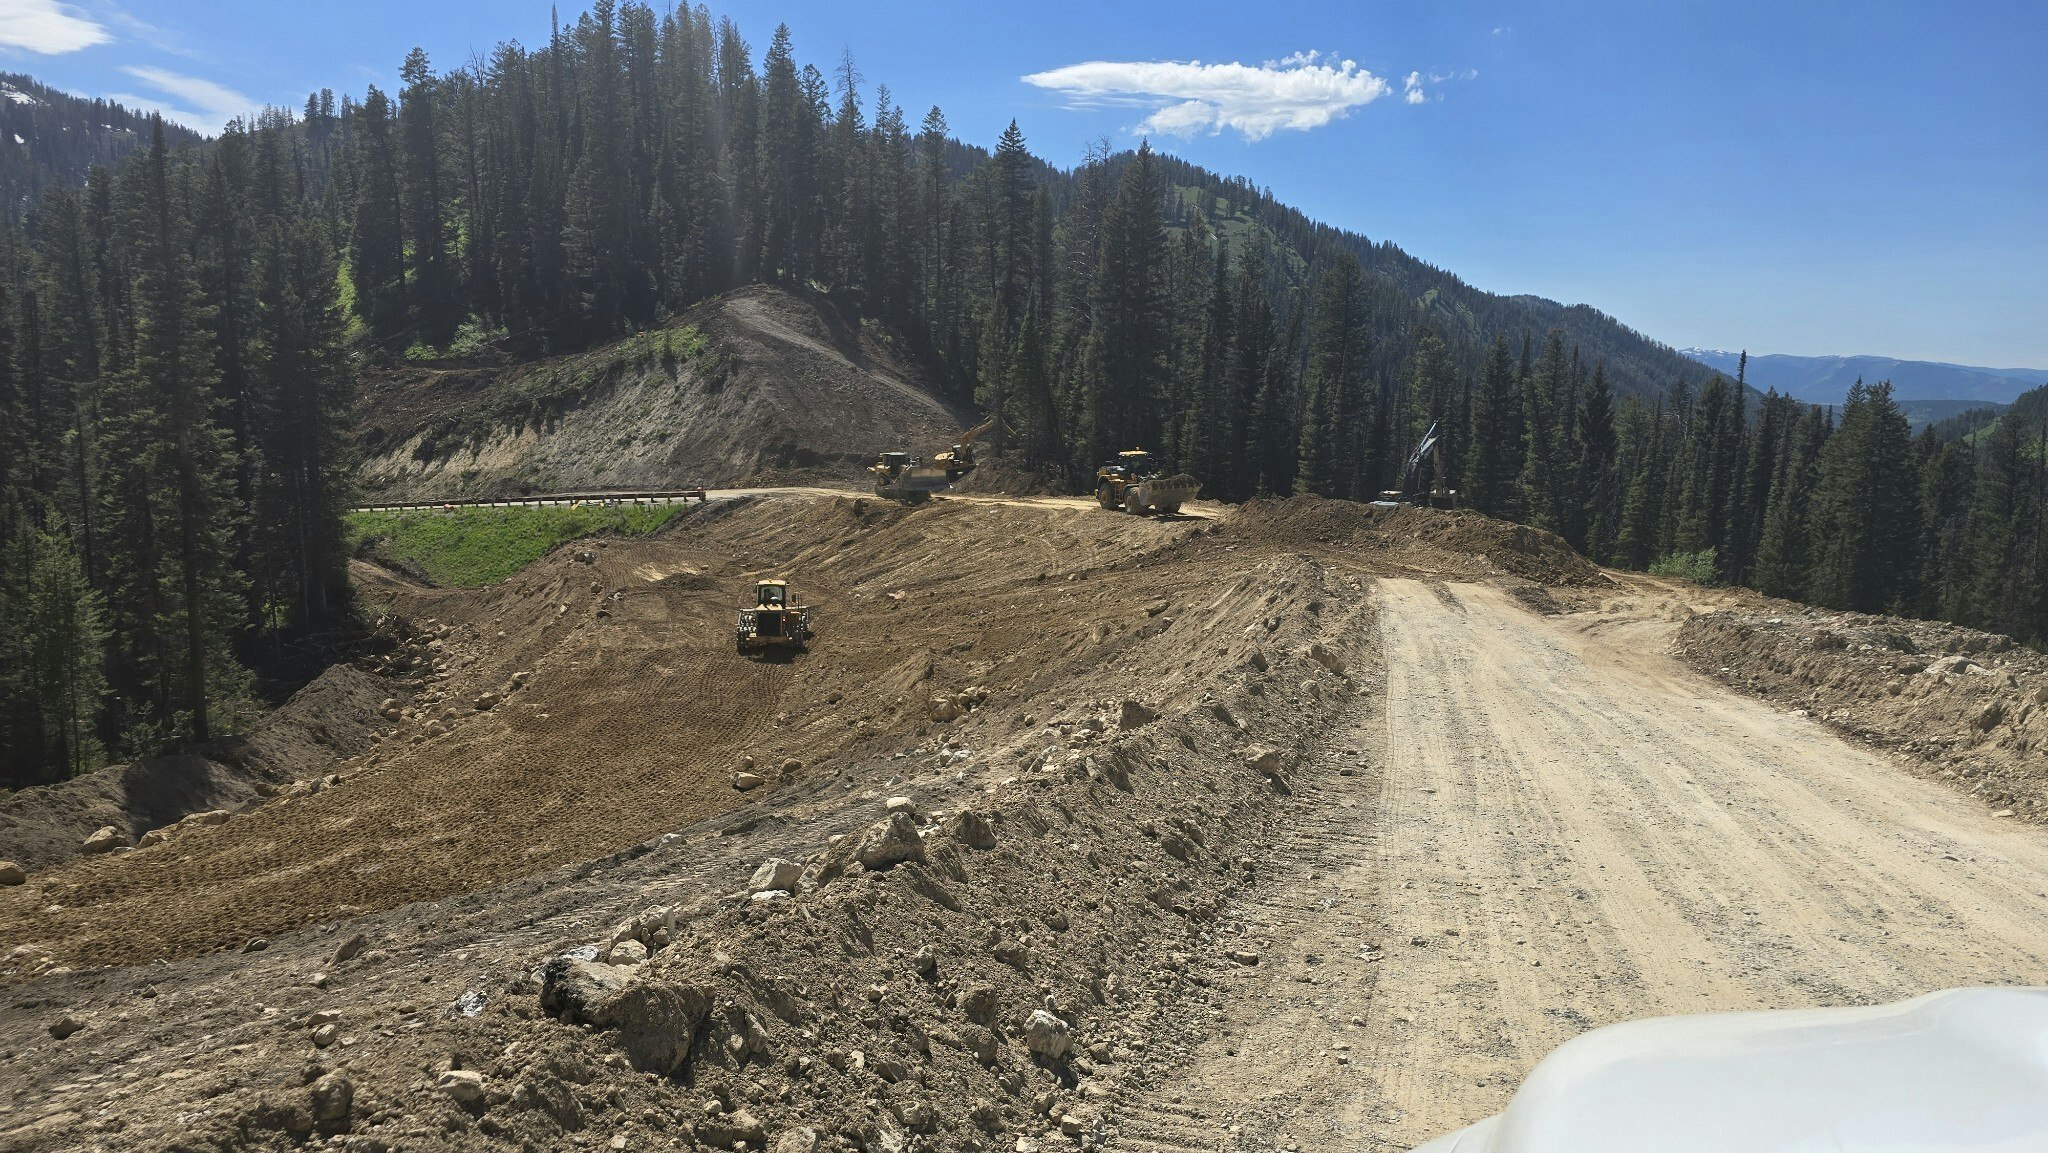 A view looking down the new Teton Pass route being built inside the old one.